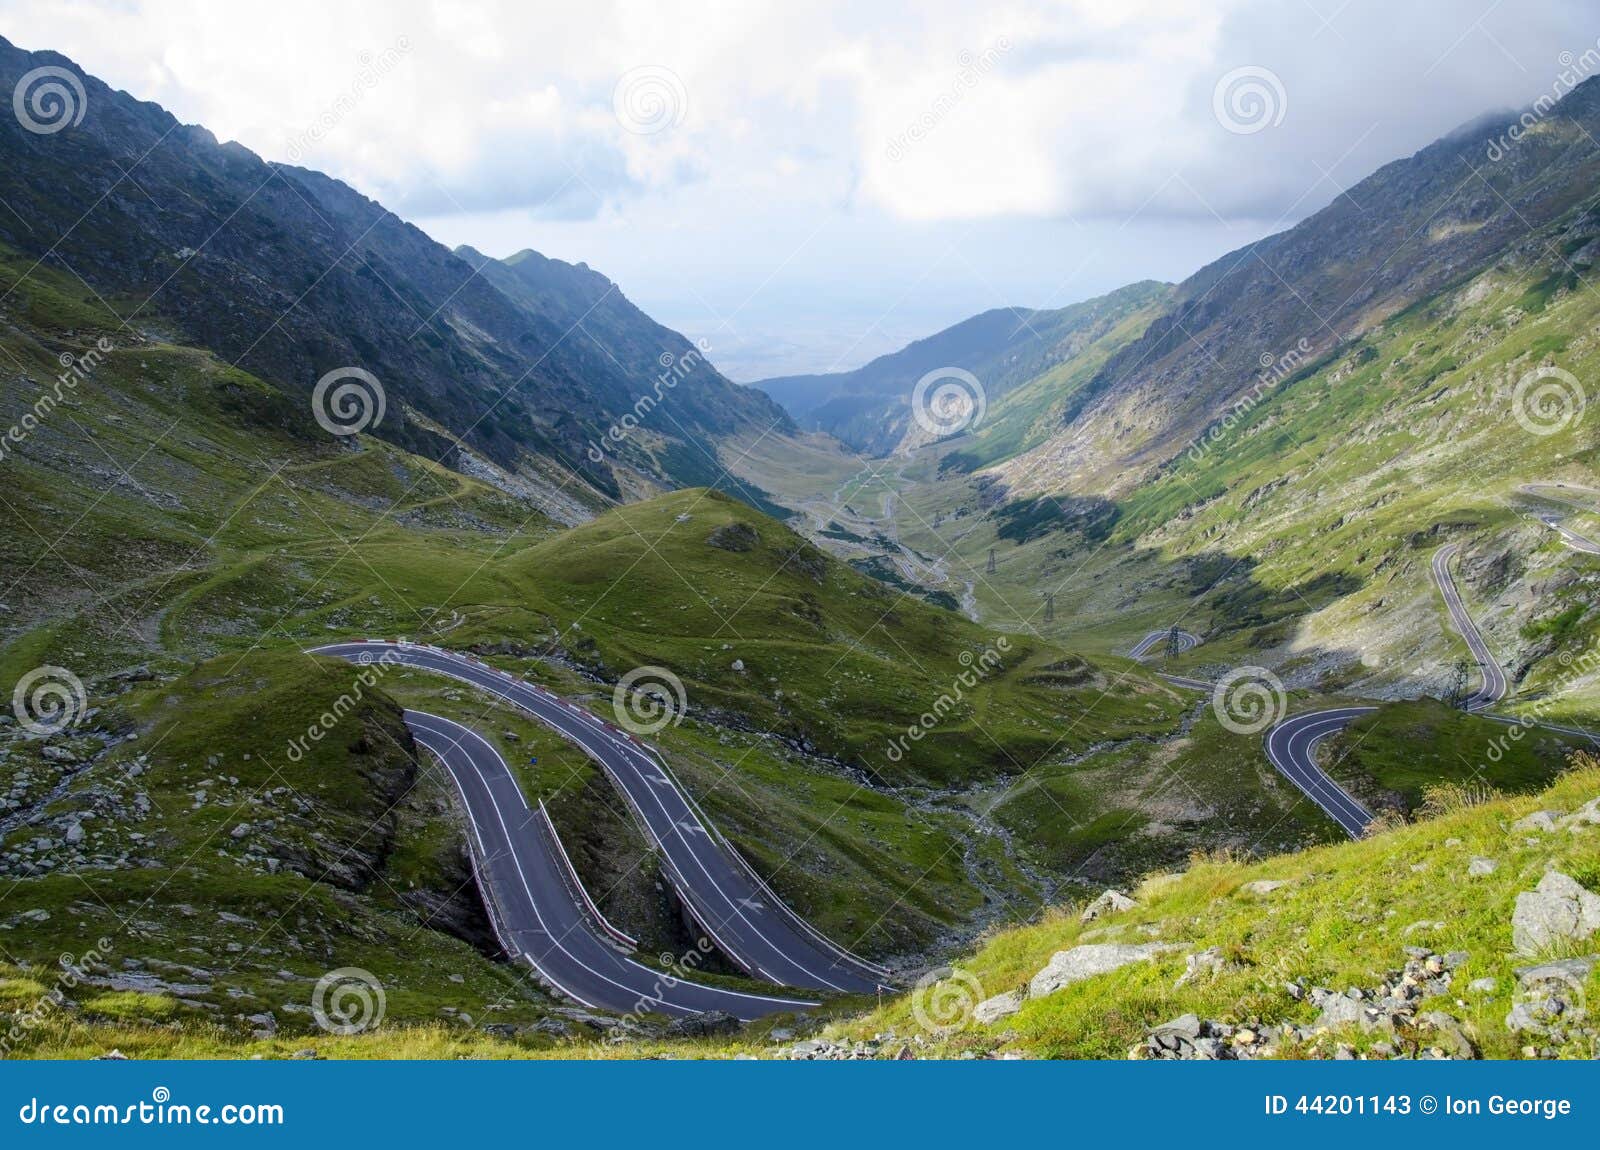 one of the most beautiful mountain roads in the world located in